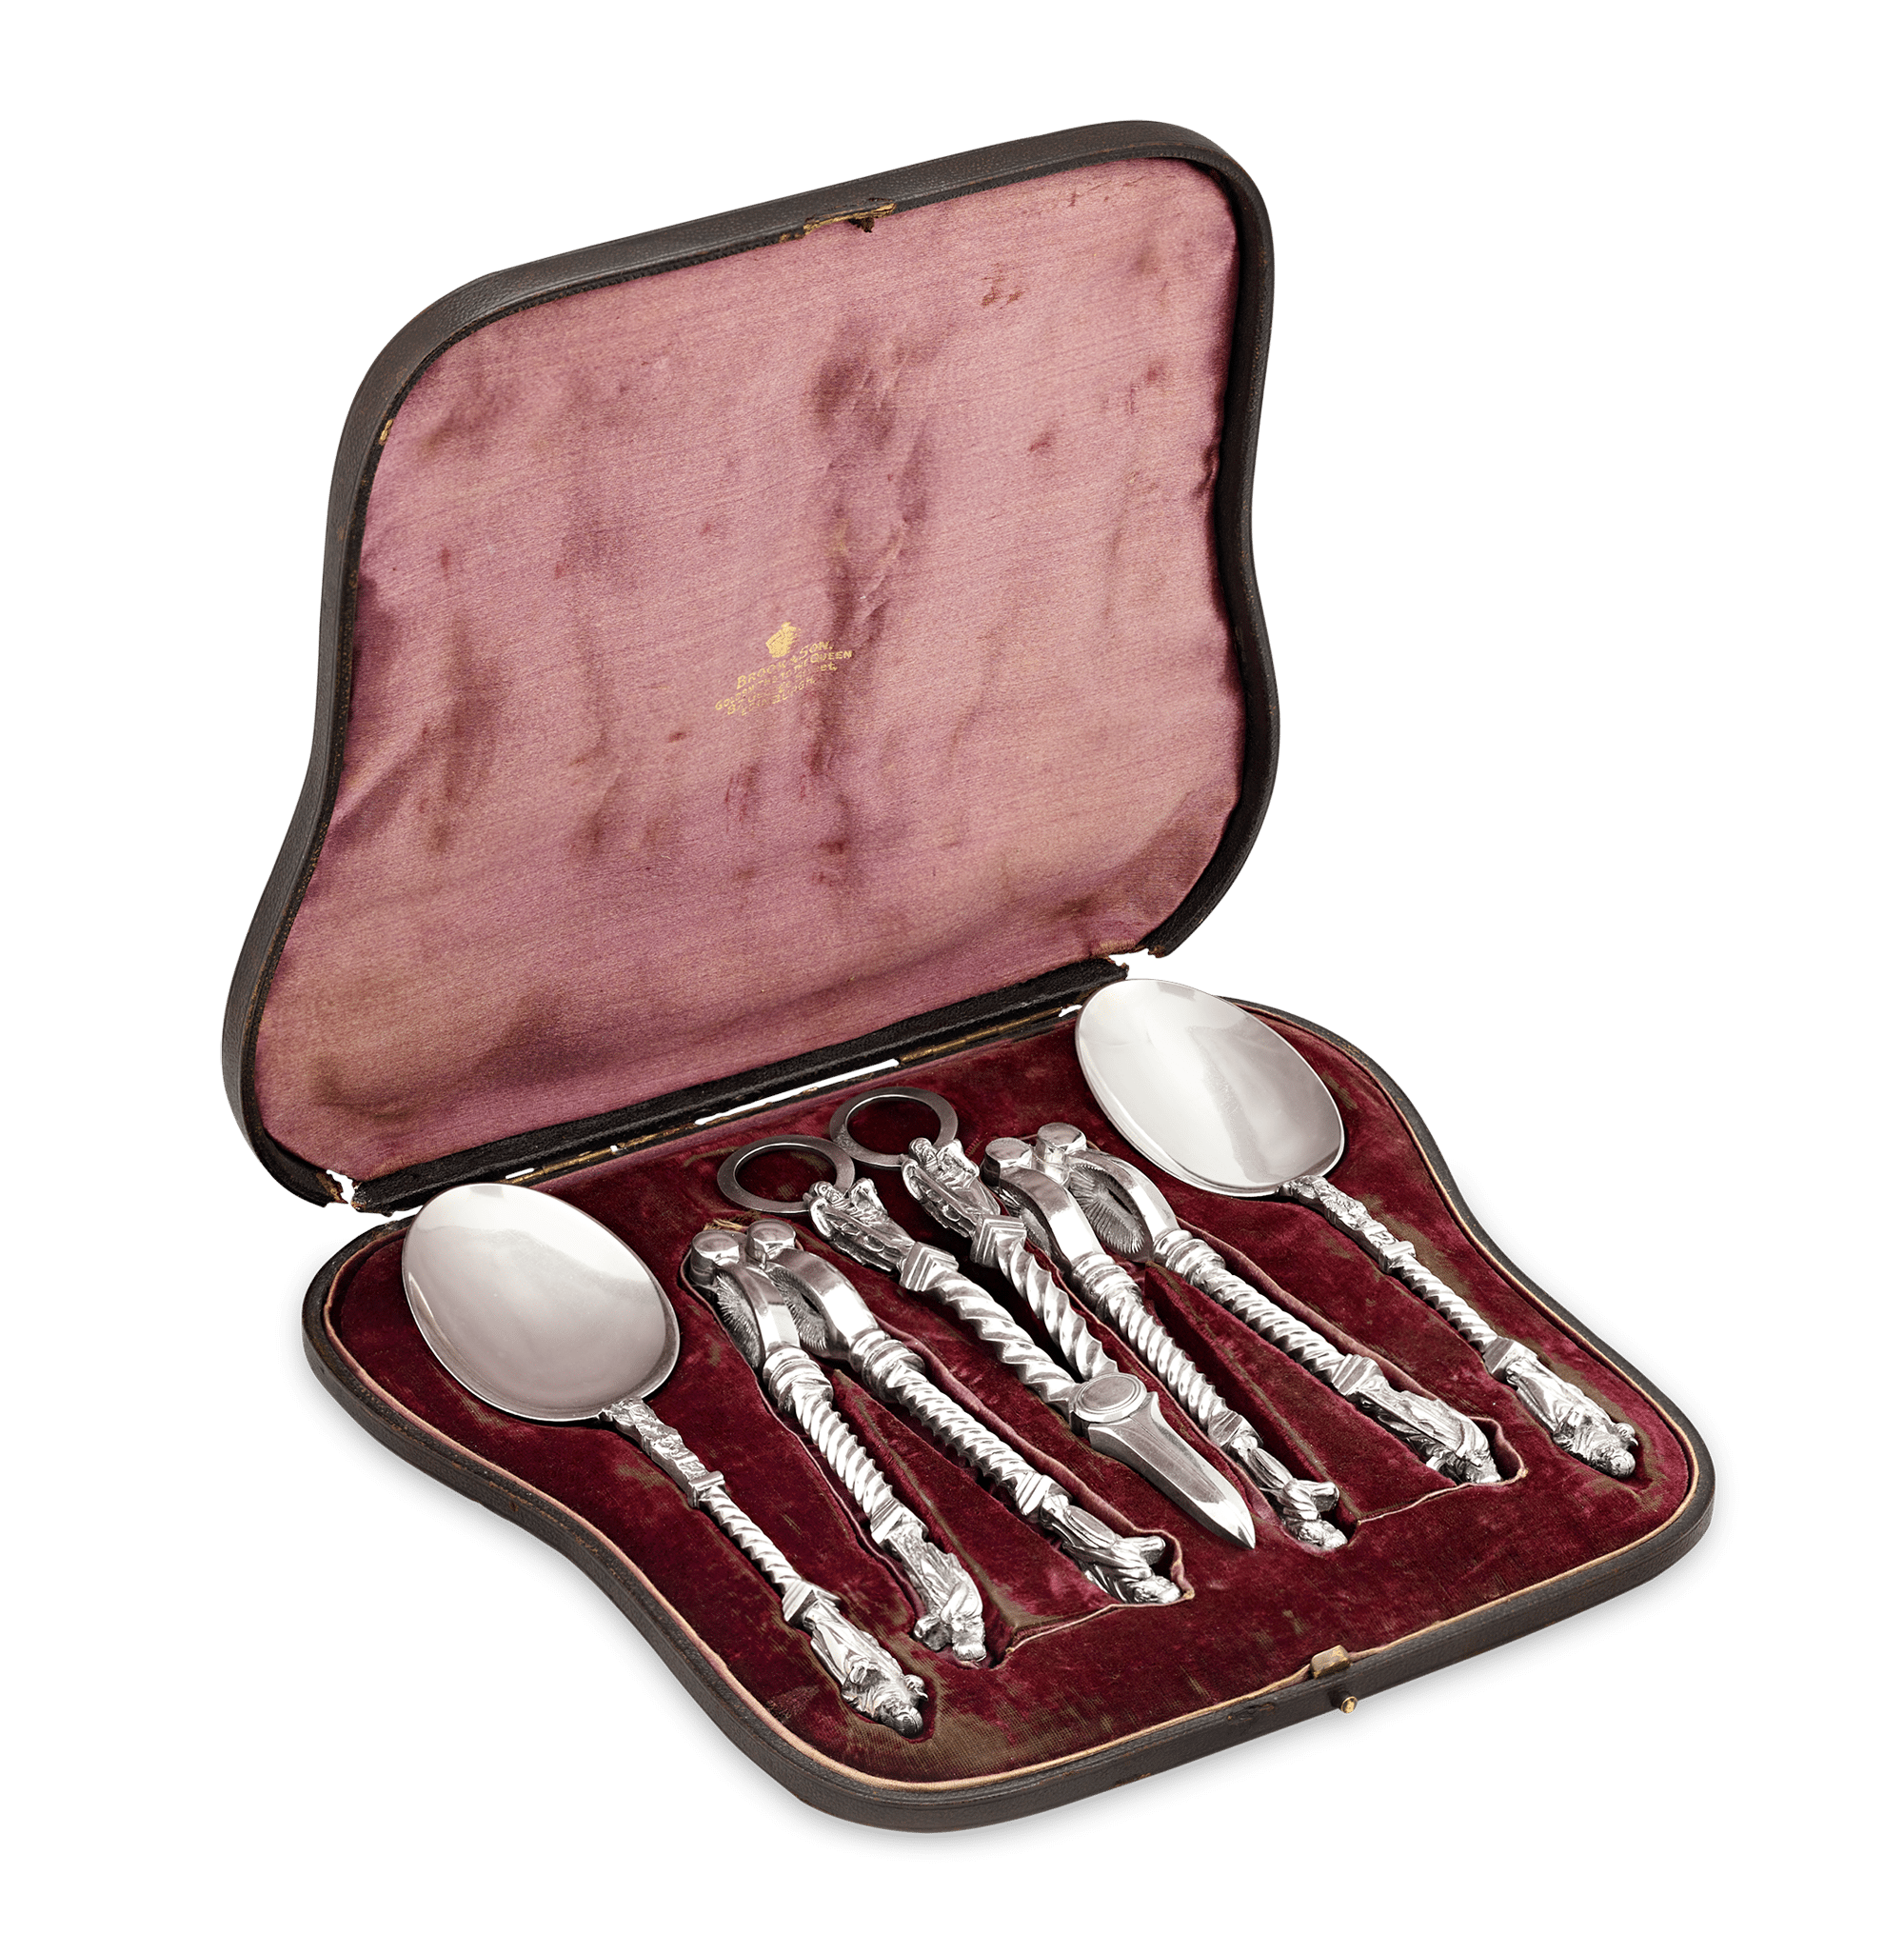 Apostle Silver Spoon Set with Nutcracker by Brook & Son